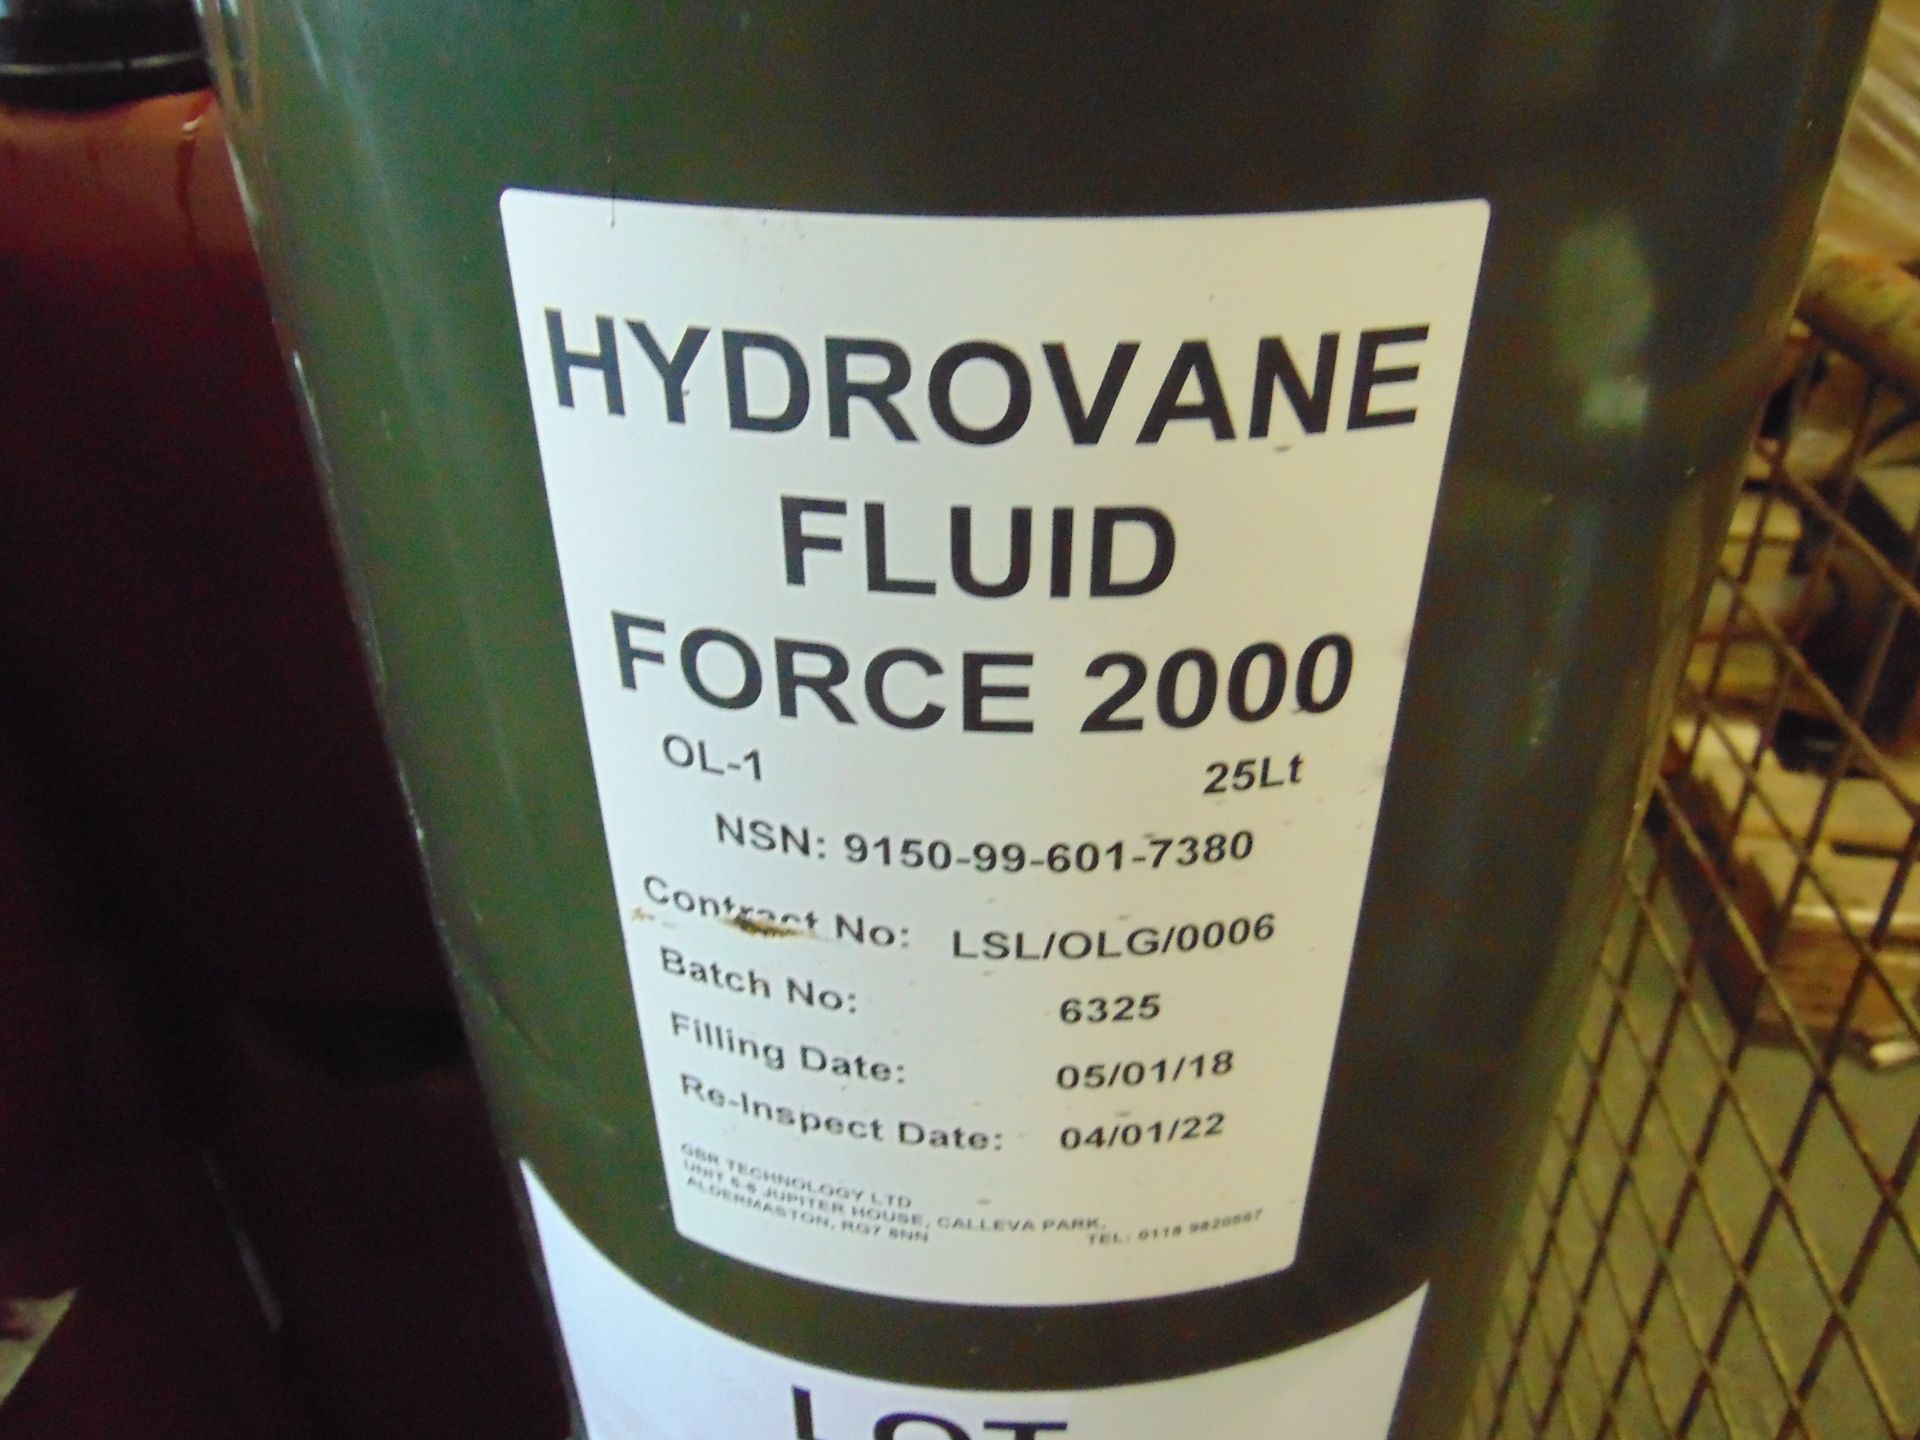 2 x Unissued 25L Sealed Drums of Hydrovane Fluid Force 2000 High Performance Compressor Oil - Image 2 of 2